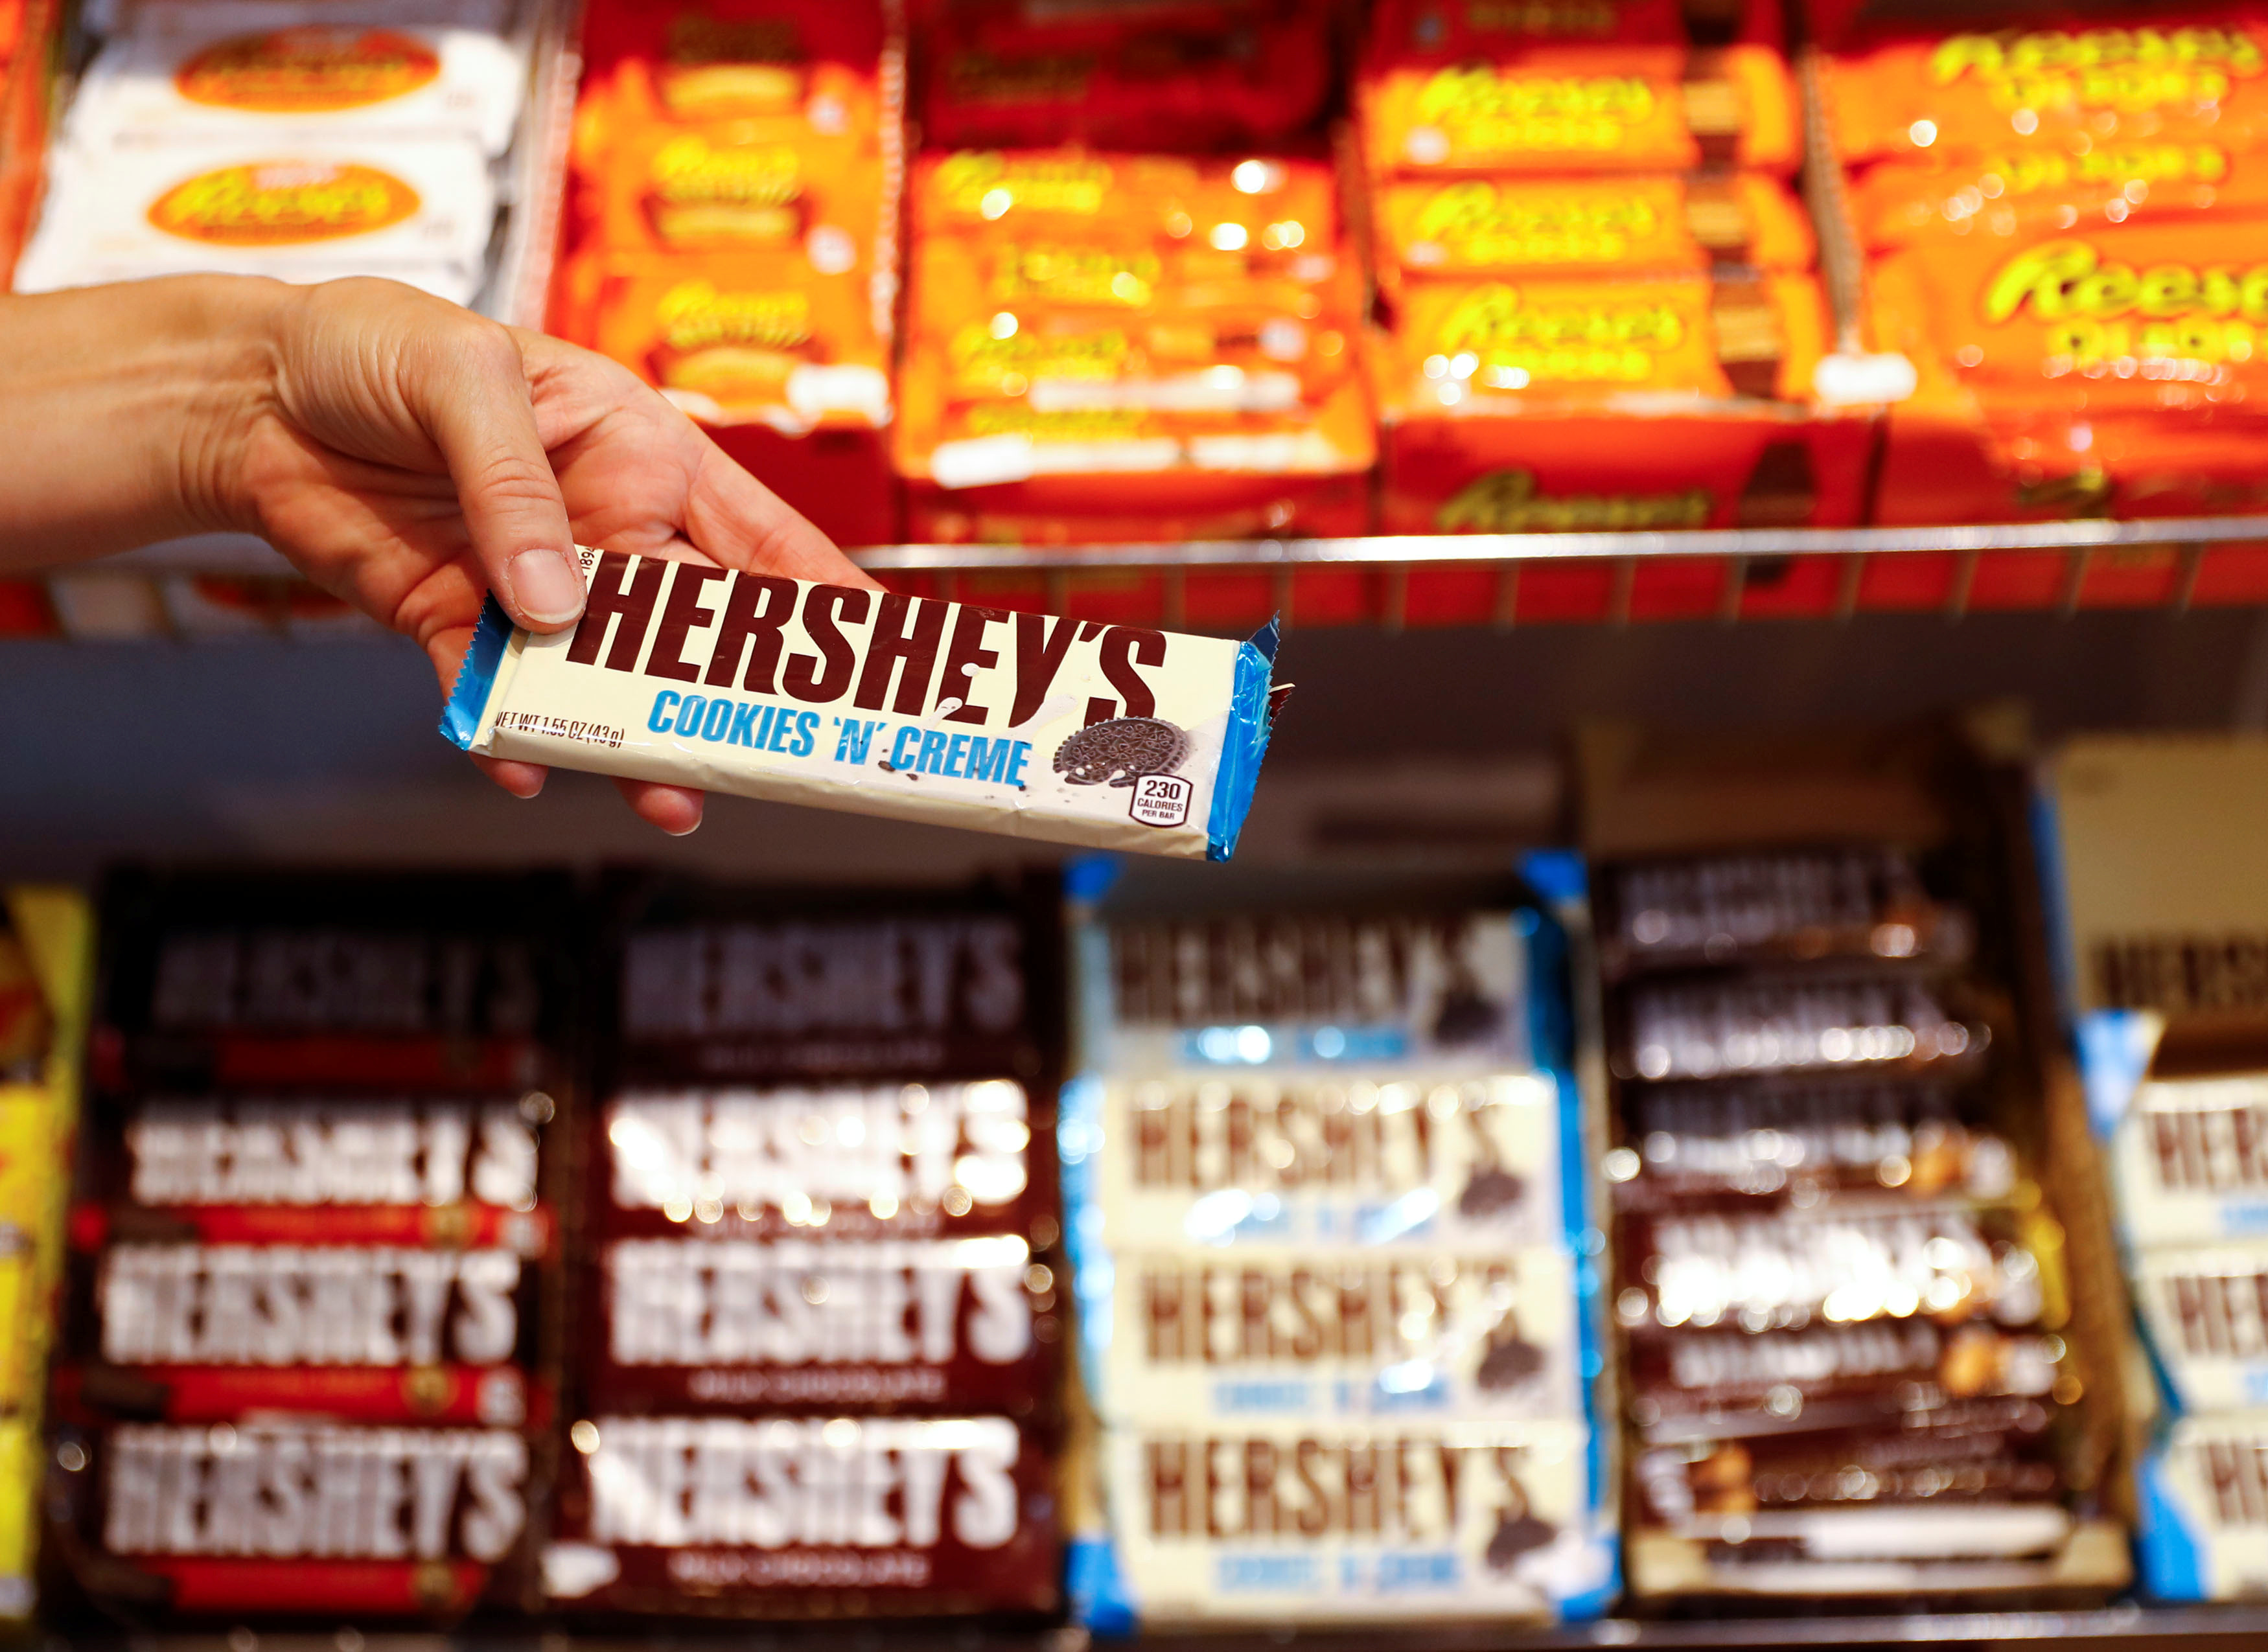 An employee shows a Hershey's chocolate bar made in USA in the 